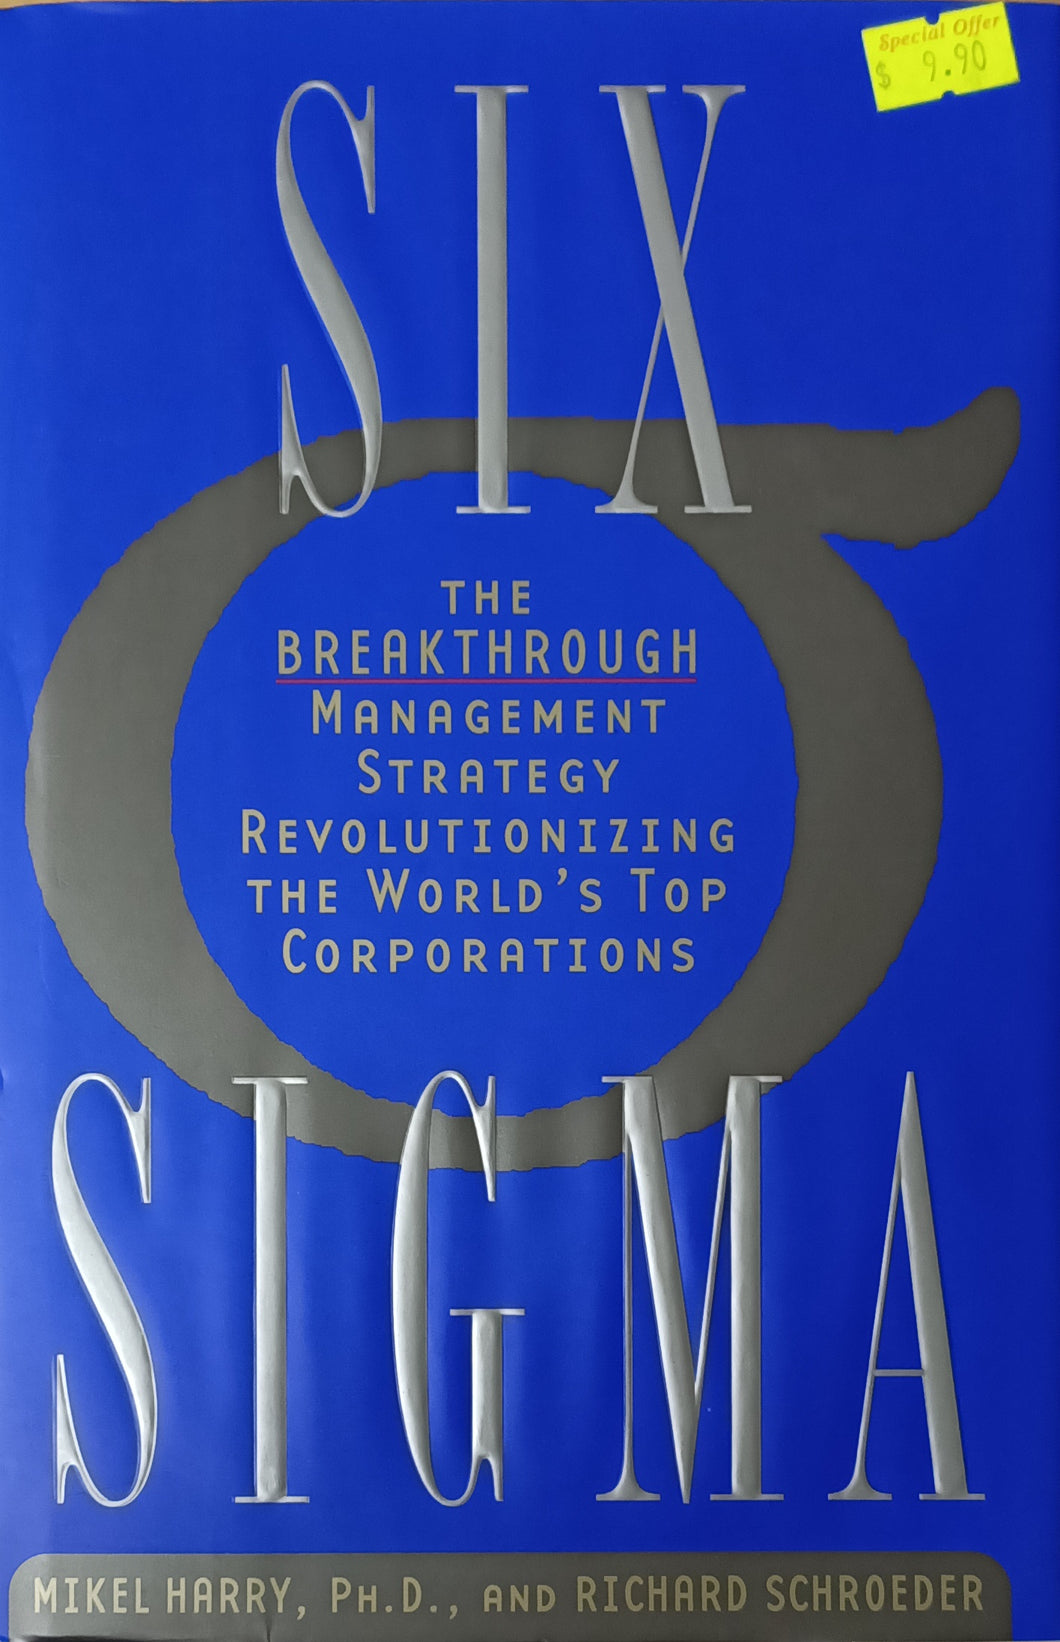 Six Sigma: The Breakthrough Management Strategy Revolutionizing The World's Top Corporations - Mikel Harry, PH.D & Richard Schroeder